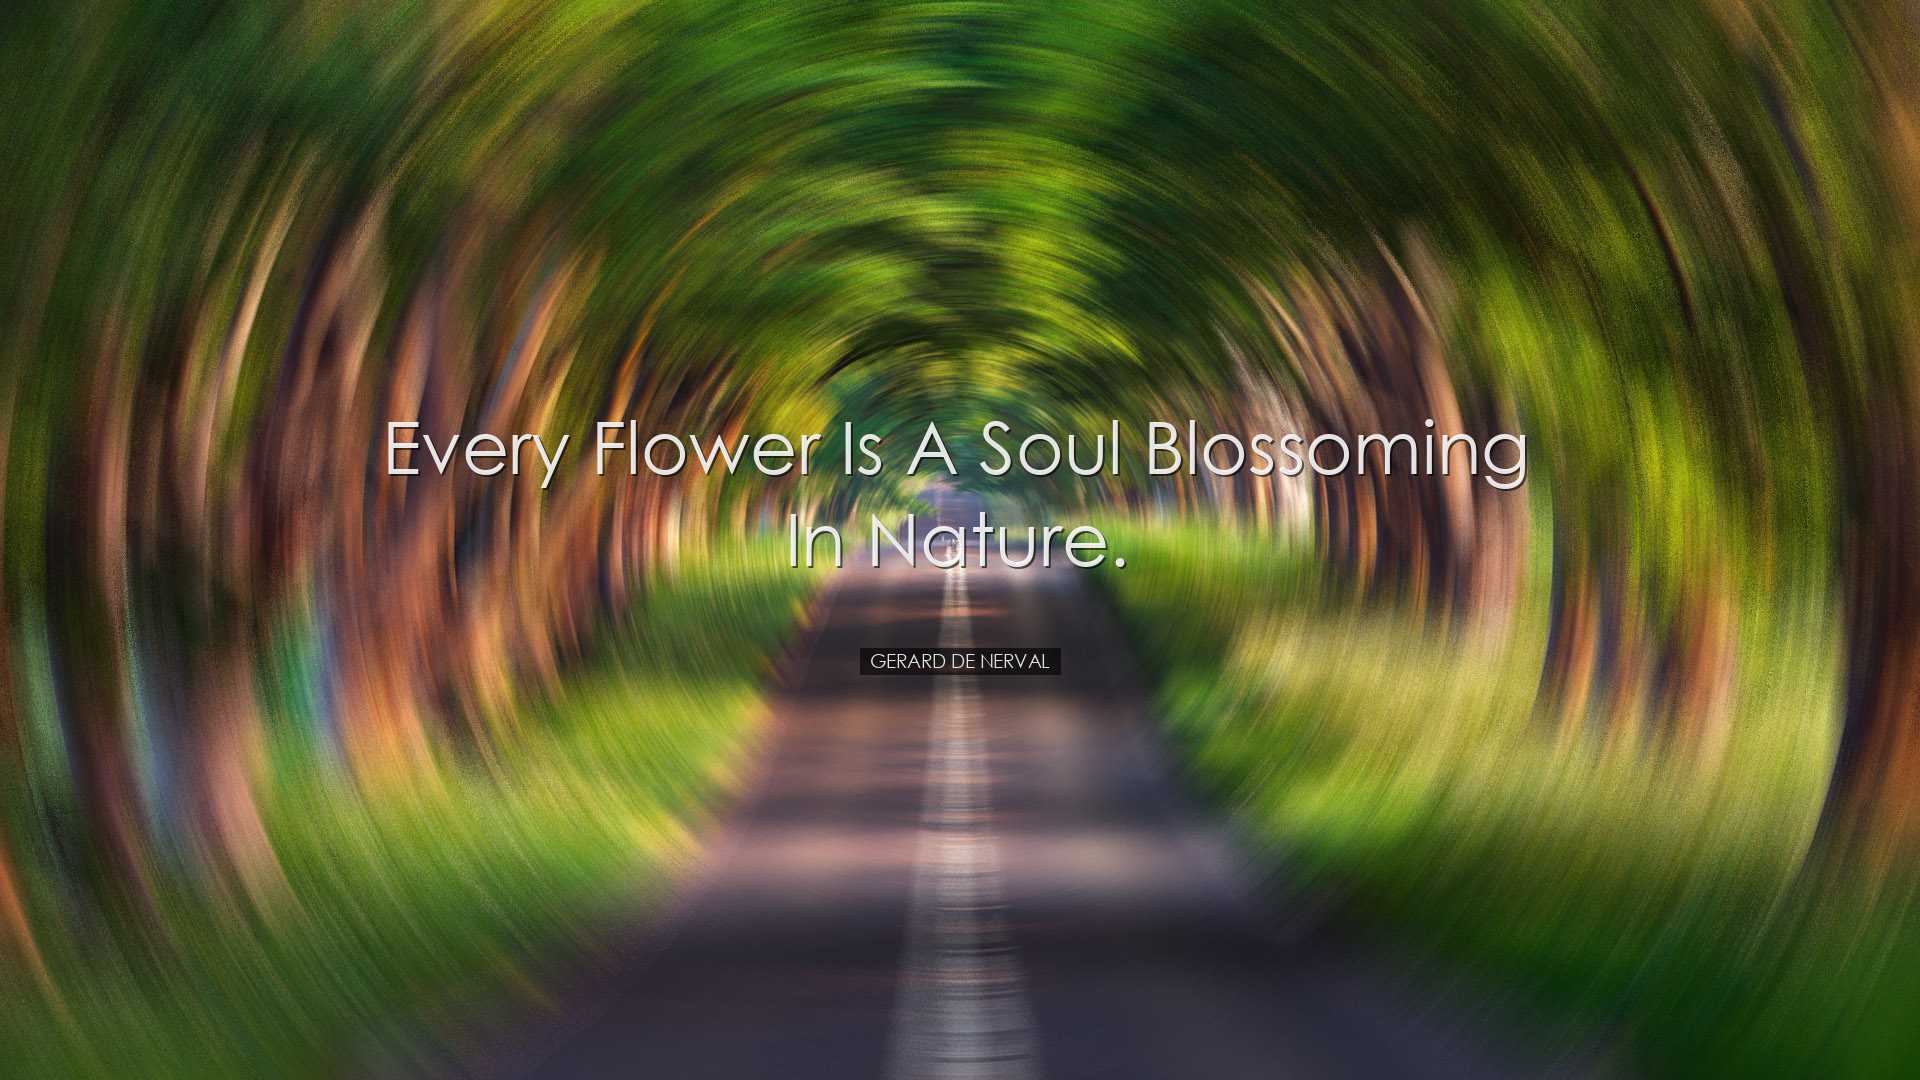 Every flower is a soul blossoming in nature. - Gerard de Nerval